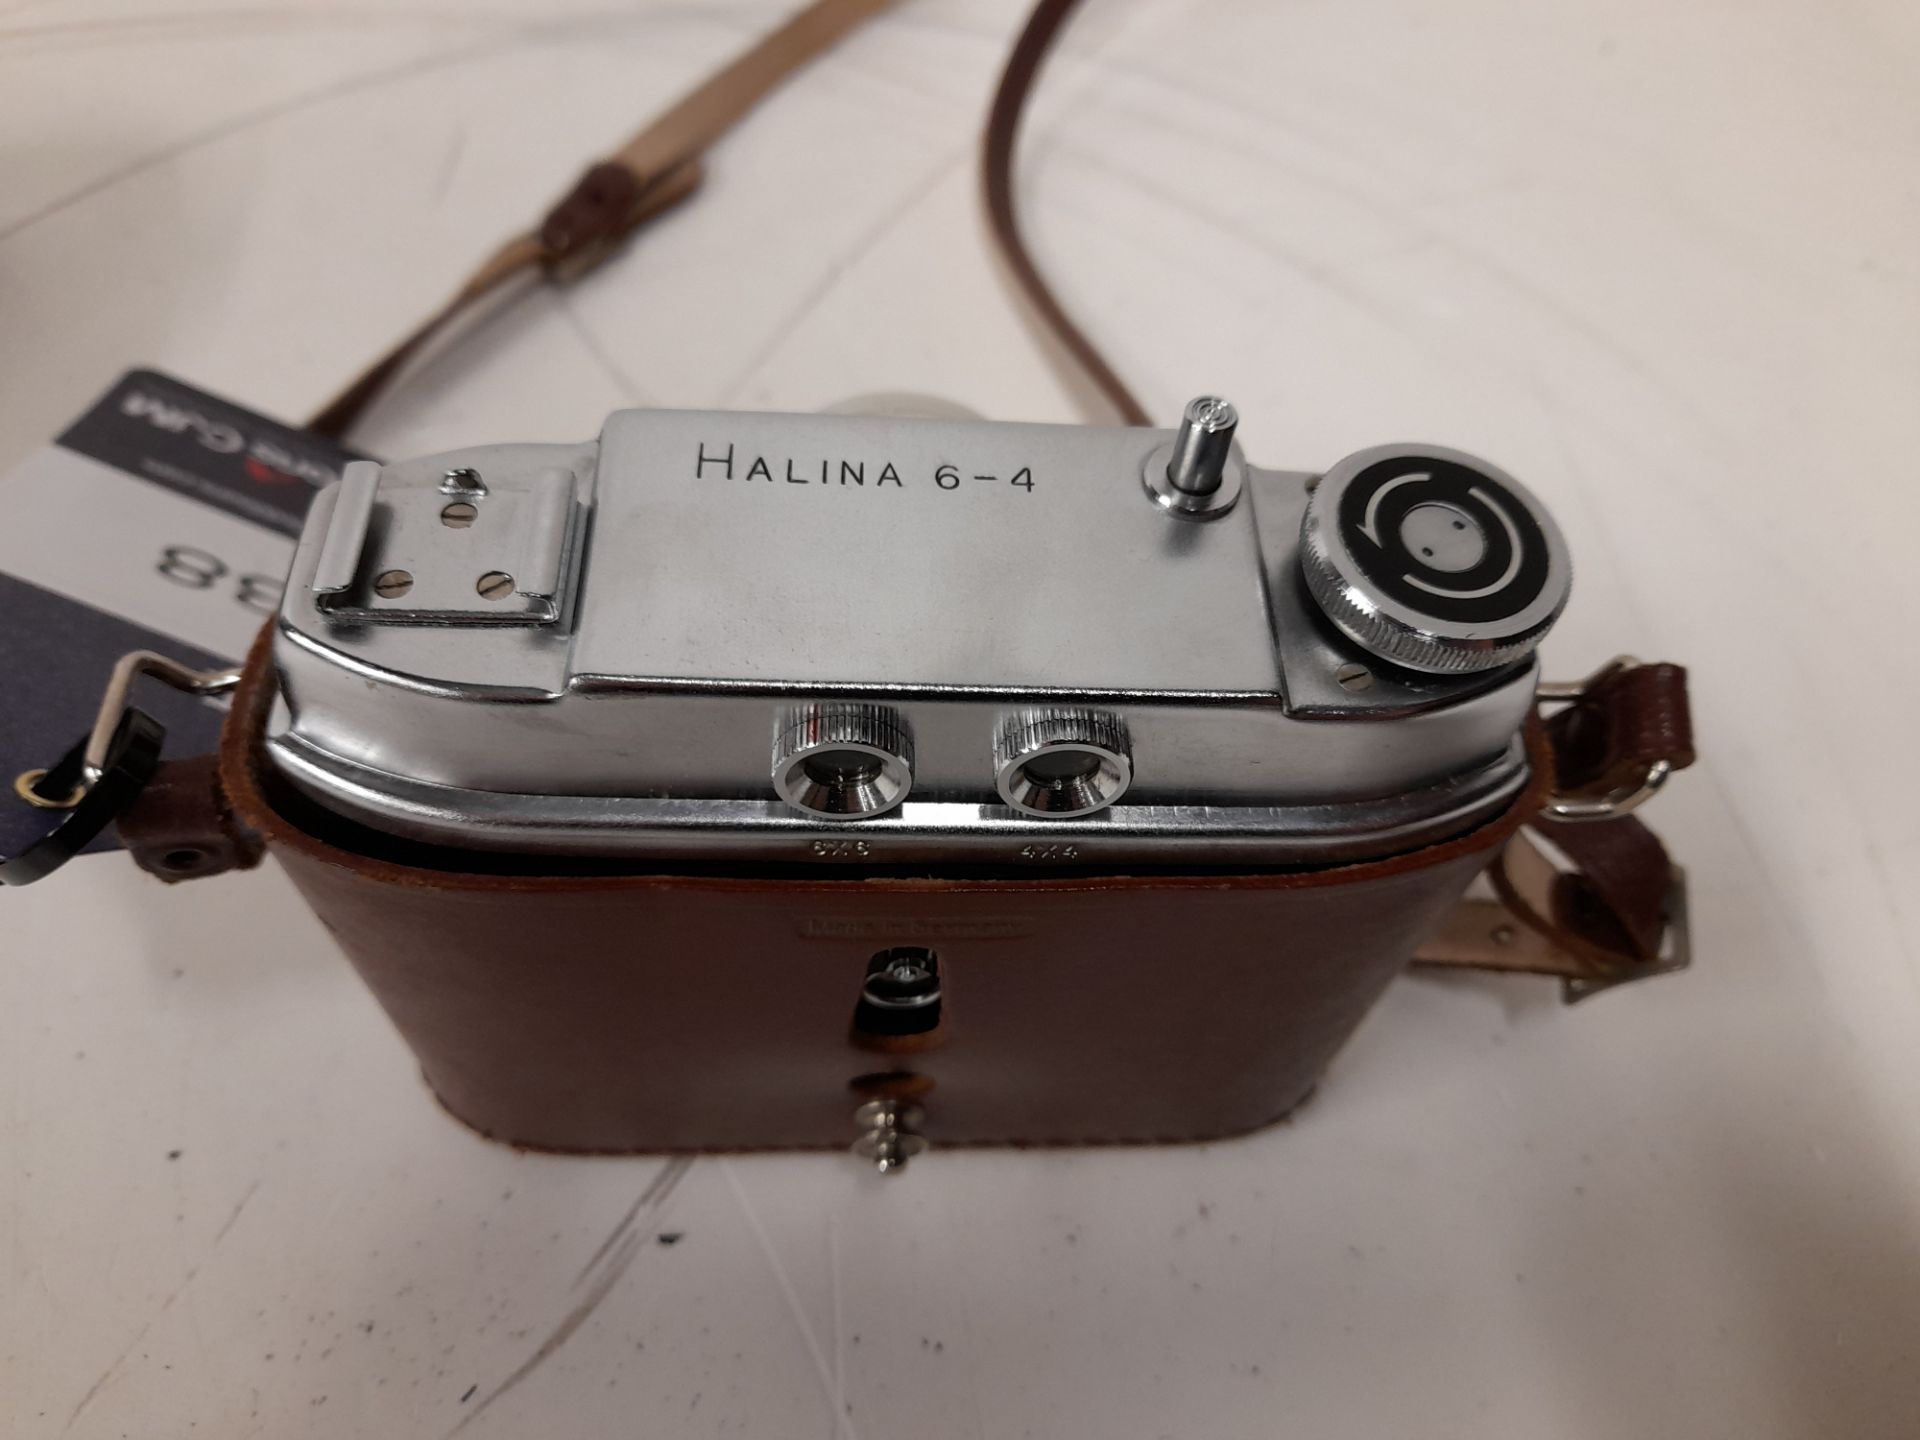 Halina Acromat 6-4 Vintage Camera with case - Image 3 of 3